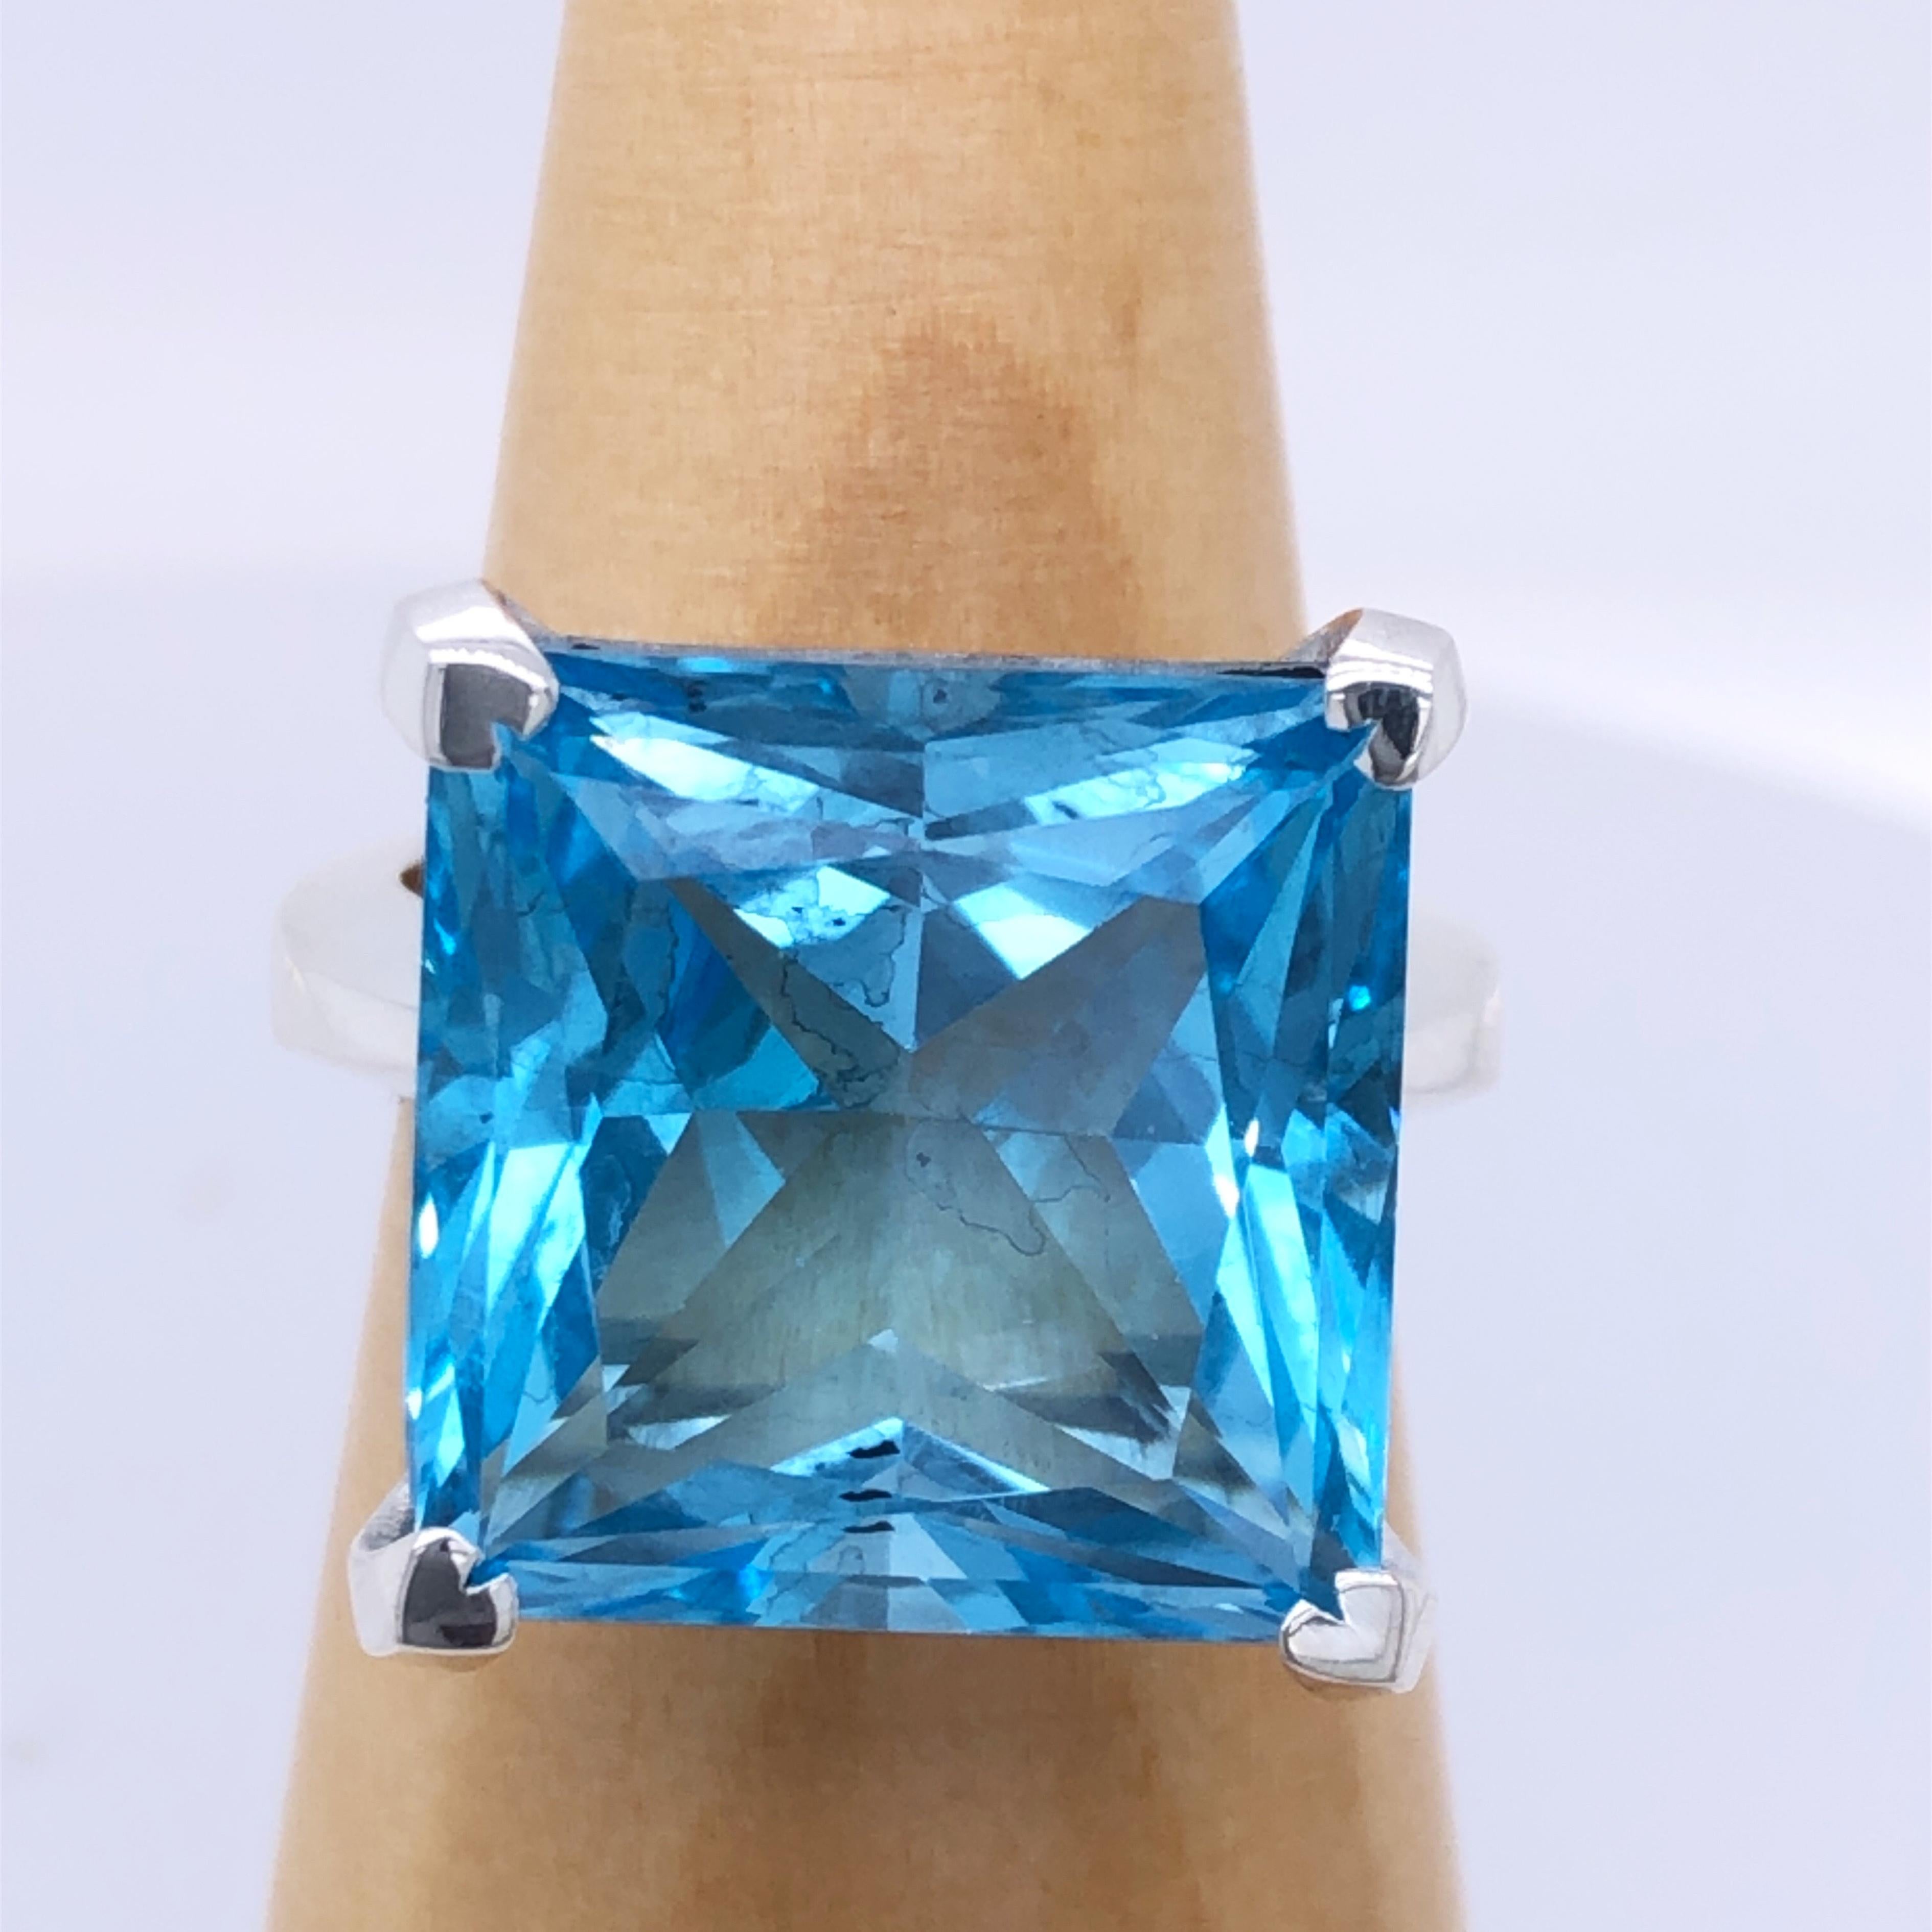 One-of-a-kind 19.47 Carat Princess Cut Natural Light Blue Topaz(0.669inches lenght 0.669inches width, 17x17mm) in a Chic yet Timeless mirror Finish Sterling Silver Cocktail Setting.
We are proud to offer this awesome piece perfect as Engagement Ring